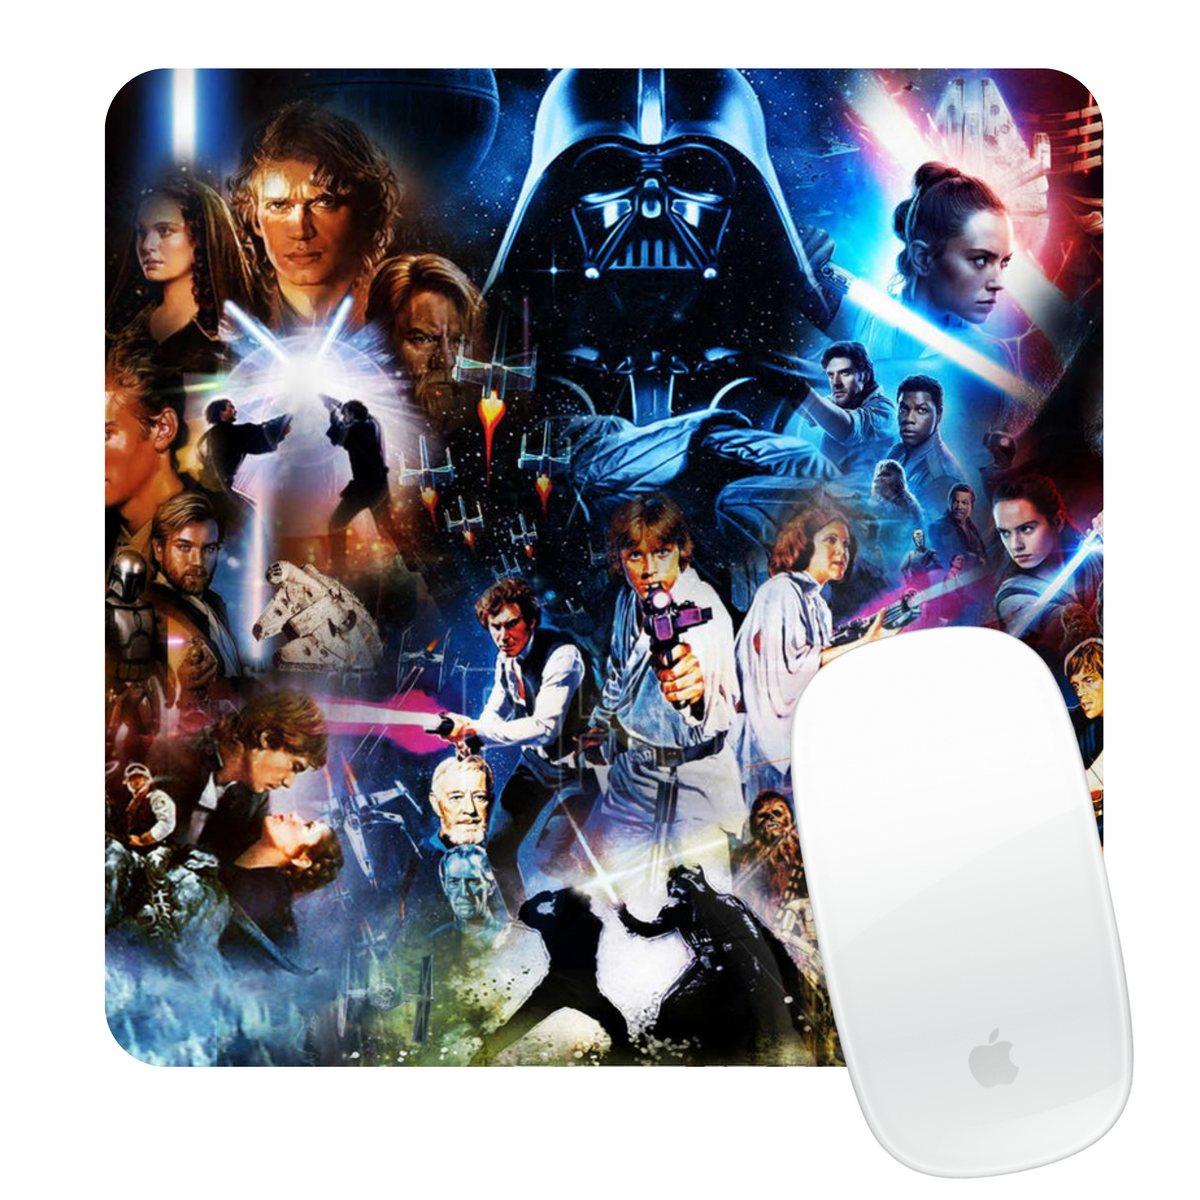 MOUSE PAD-STAR WARS